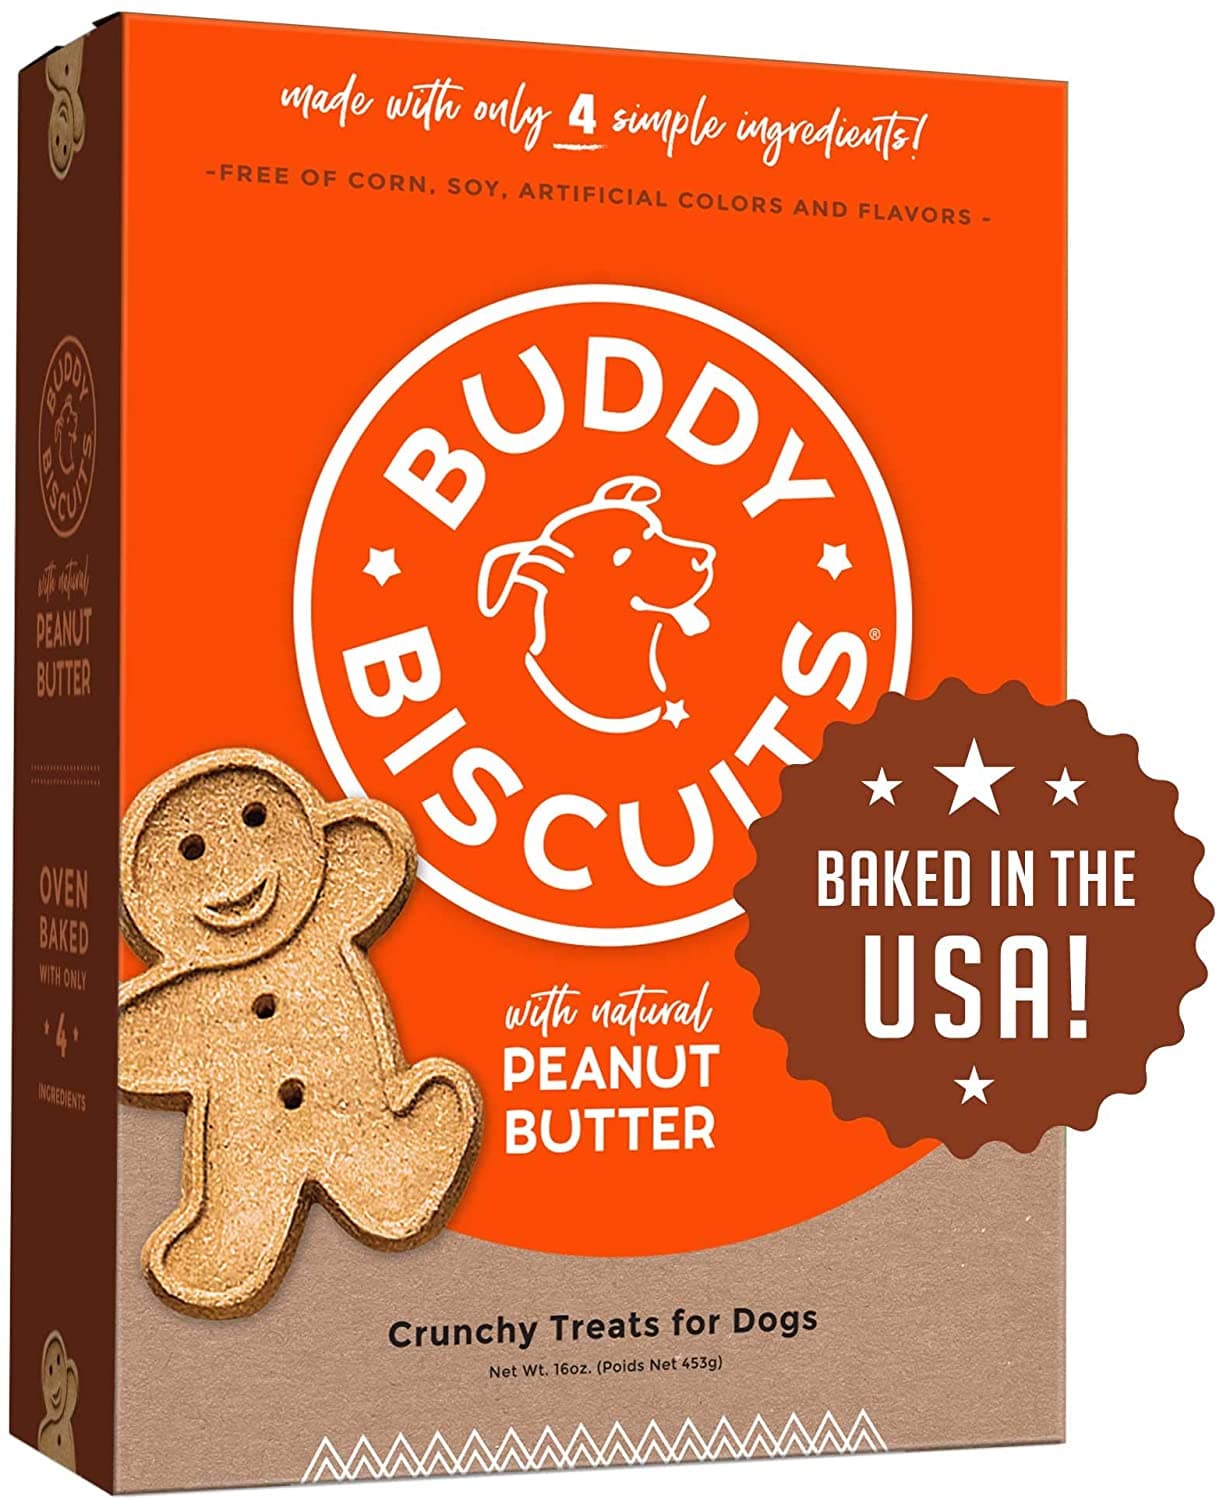 Buddy Biscuits Crunchy Treats with Peanut Butter - 16 oz.